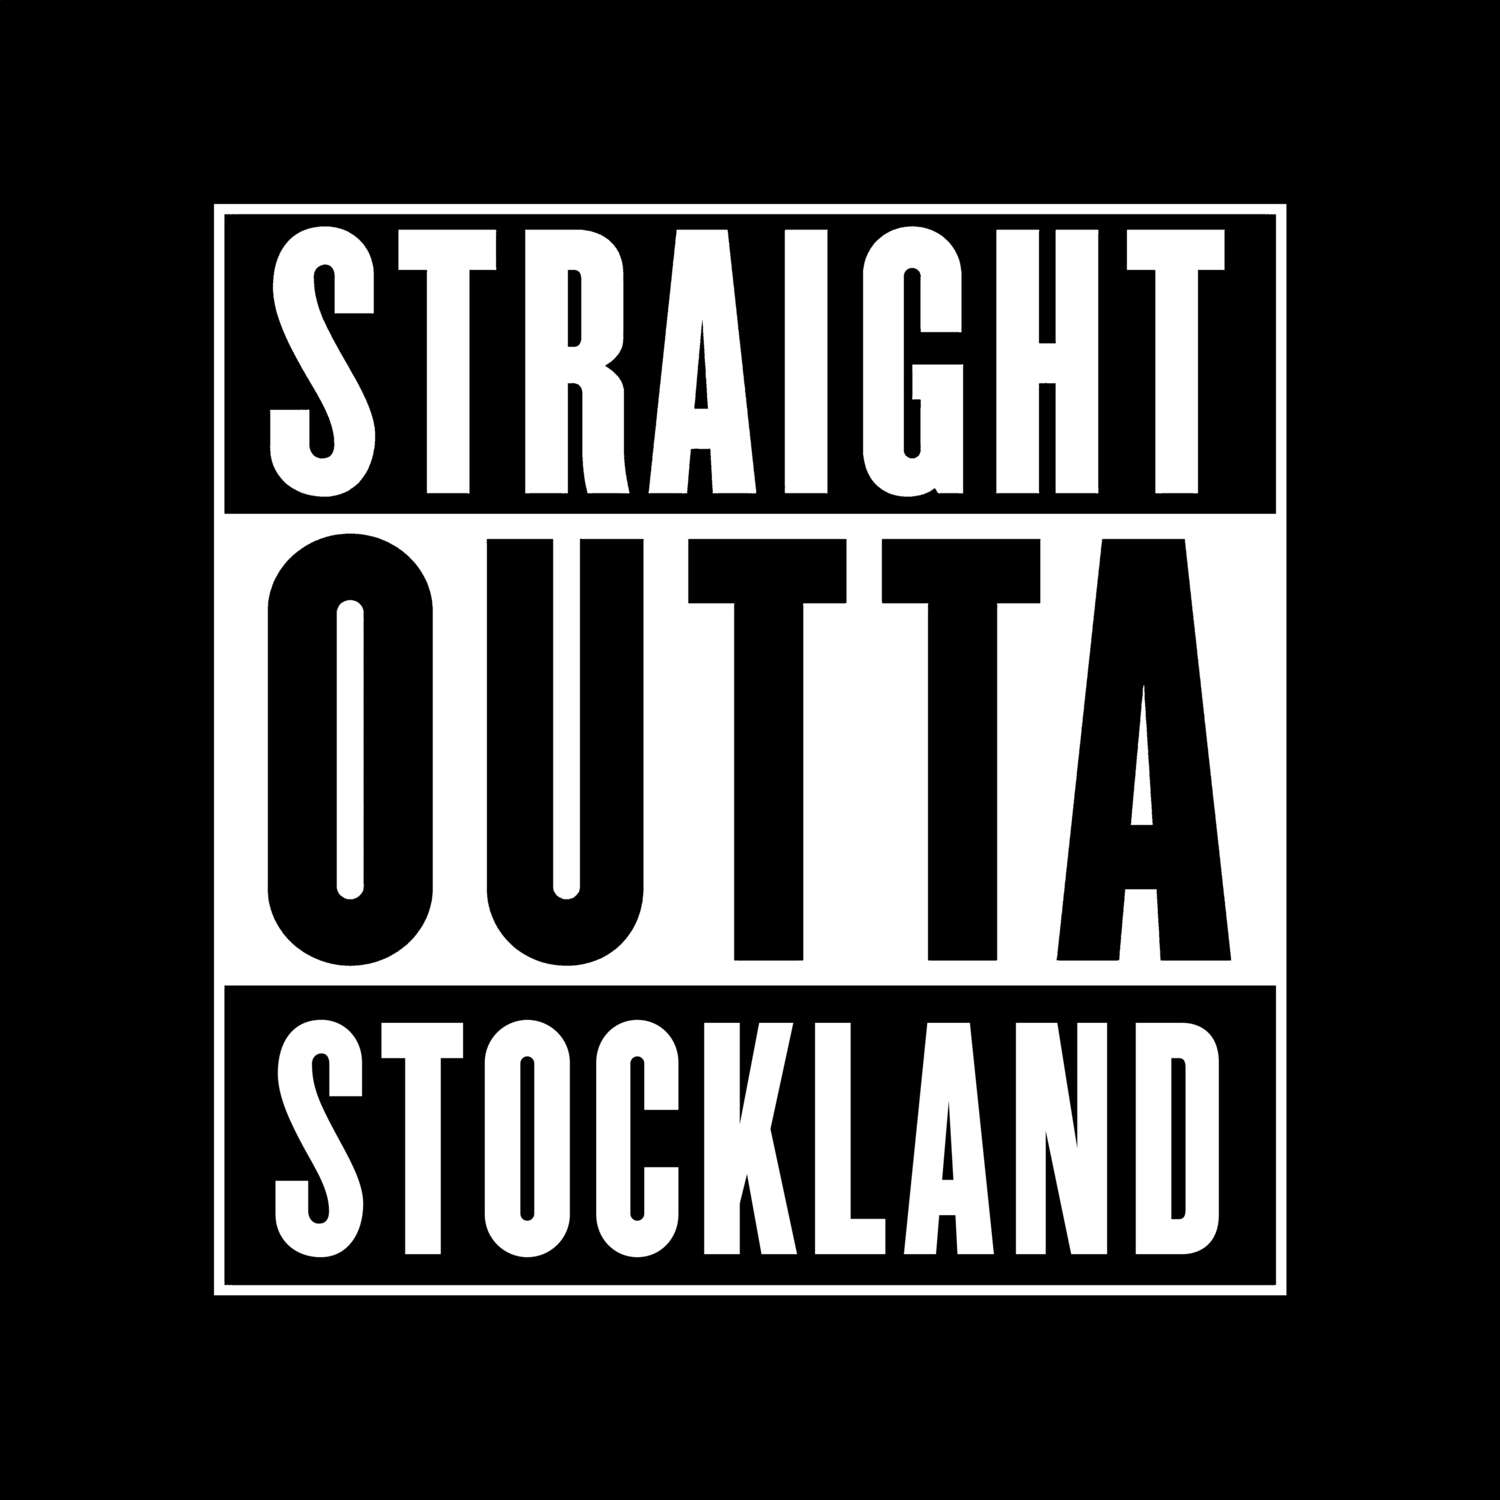 Stockland T-Shirt »Straight Outta«